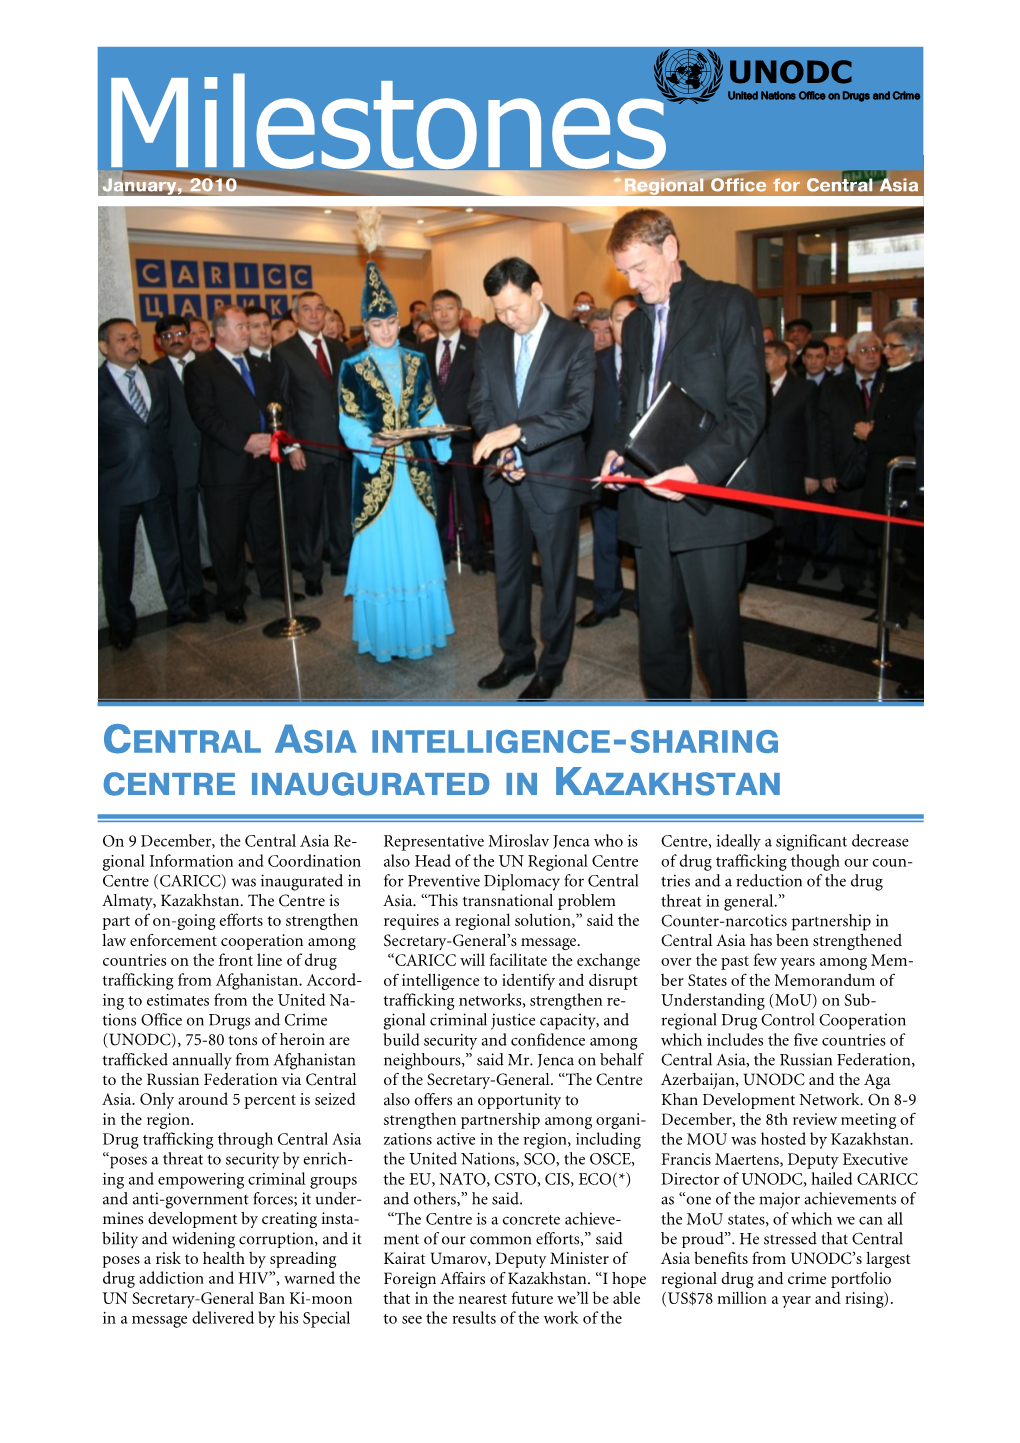 Central Asia Intelligence -Sharing Centre Inaugurated in Kazakhstan